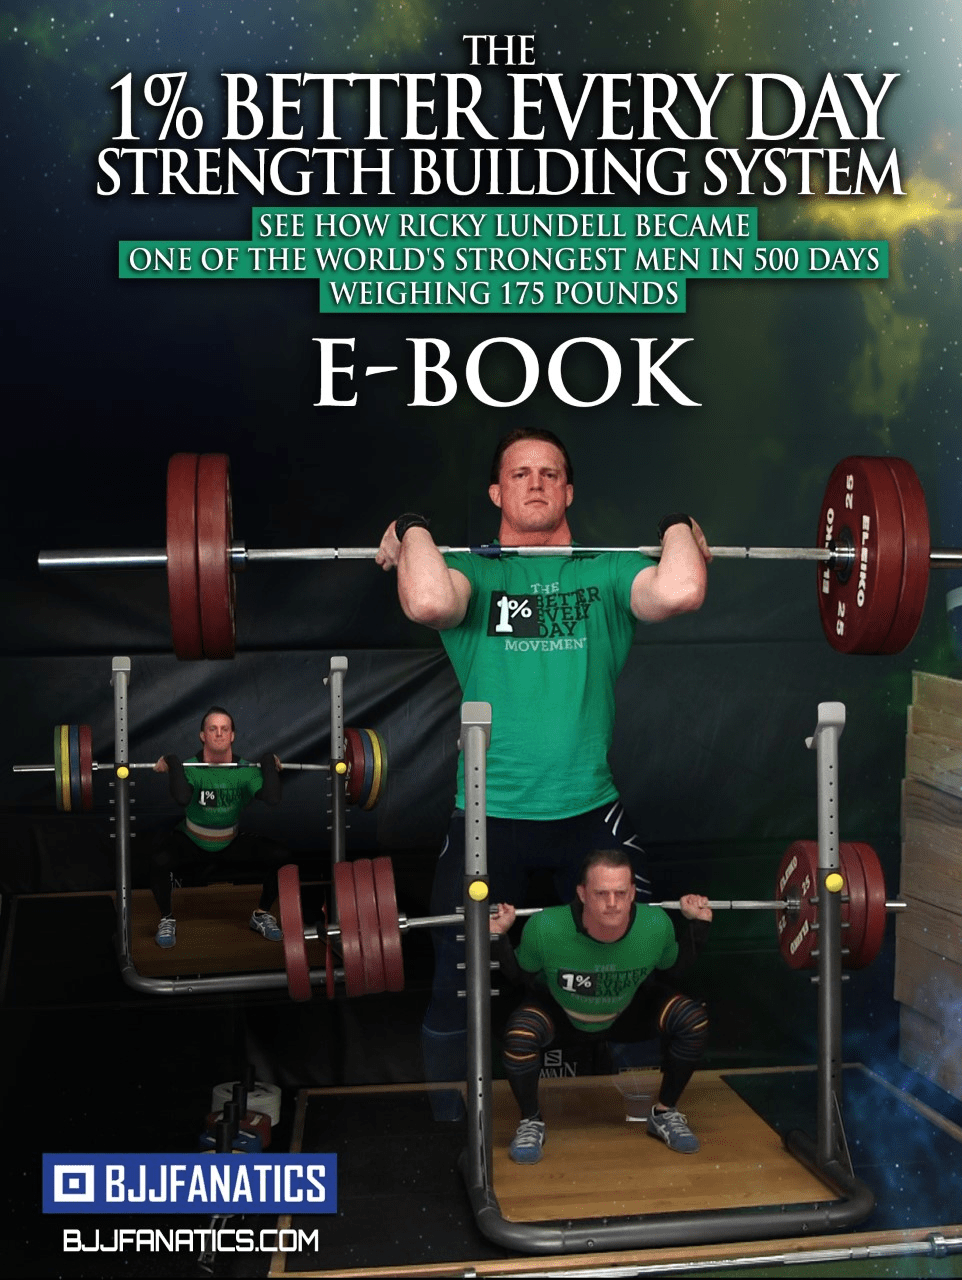 1% Better Every Day™ Strength Building System by Ricky Lundell - Fanatic Wrestling